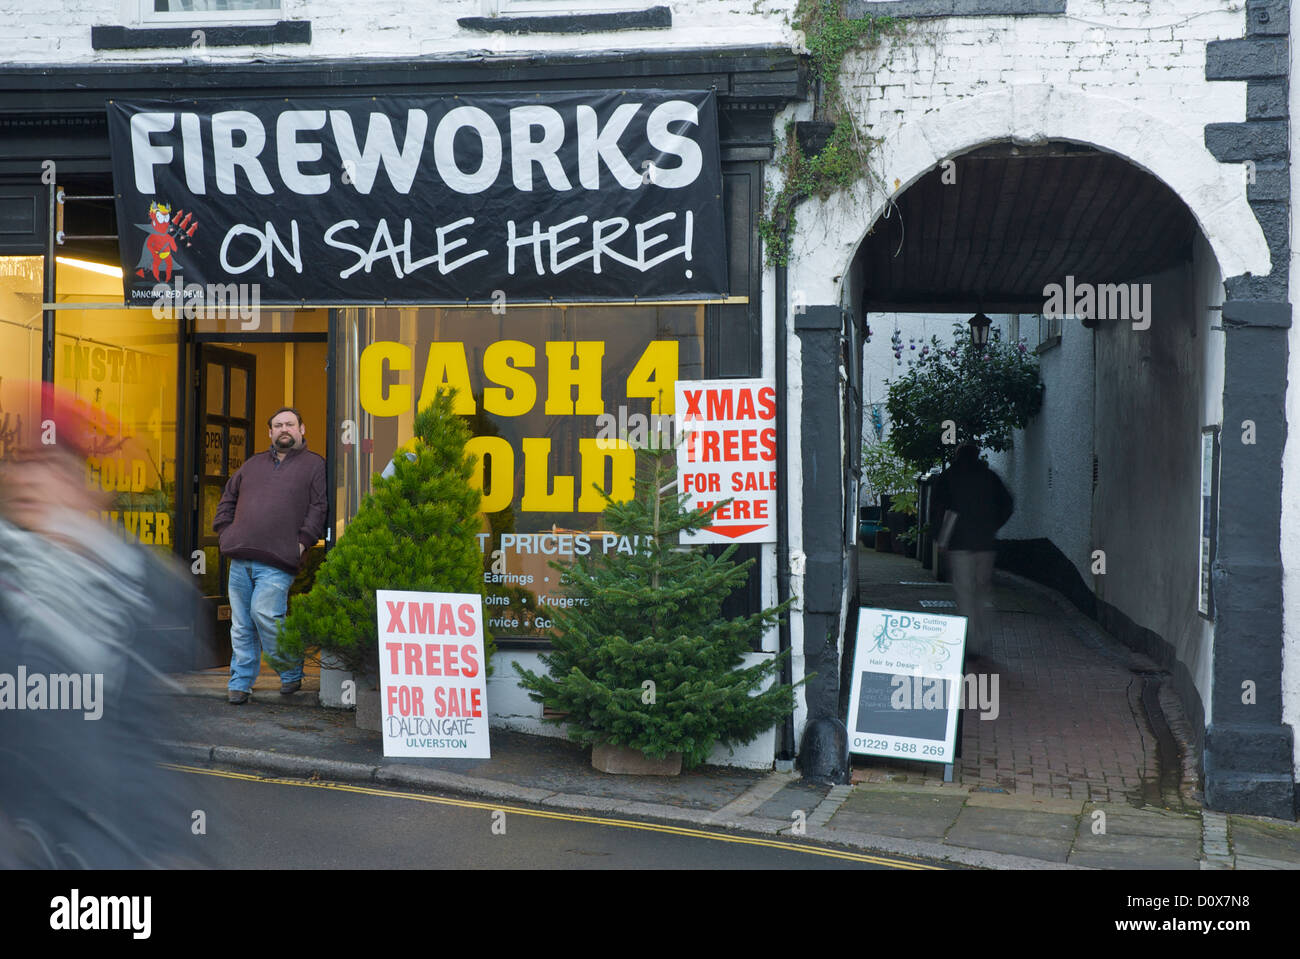 'Cash 4 Gold' shop selling fireworks and Christmas trees, Ulverston, Cumbria, England UK Stock Photo